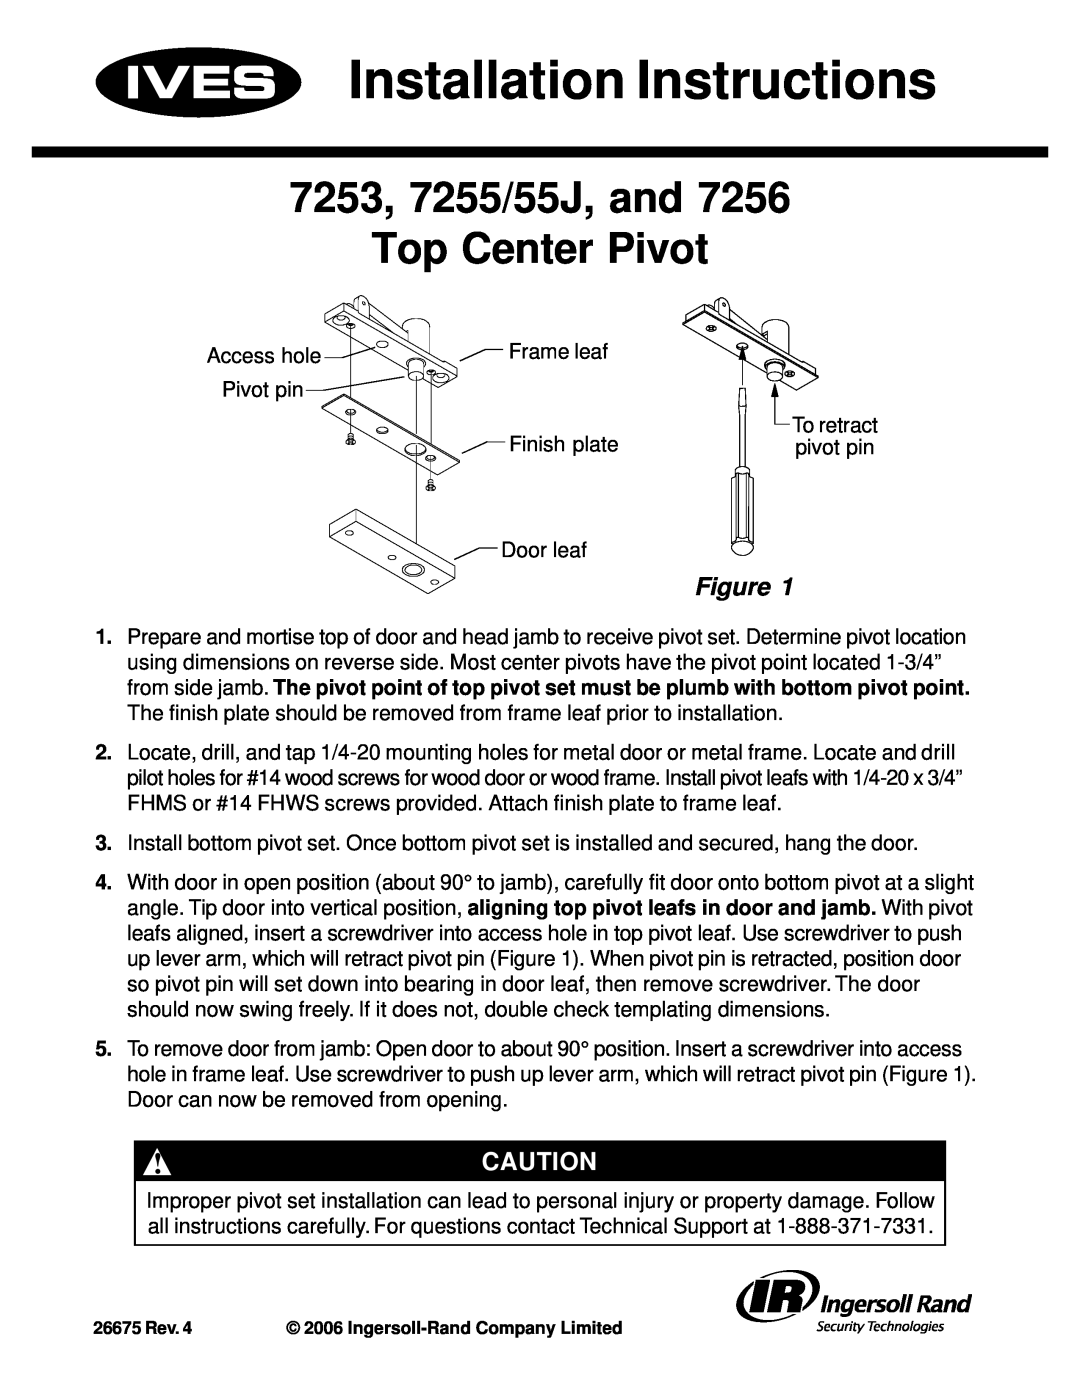 Ives 7256 installation instructions Installation Instructions, 7253, 7255/55J, and Top Center Pivot 